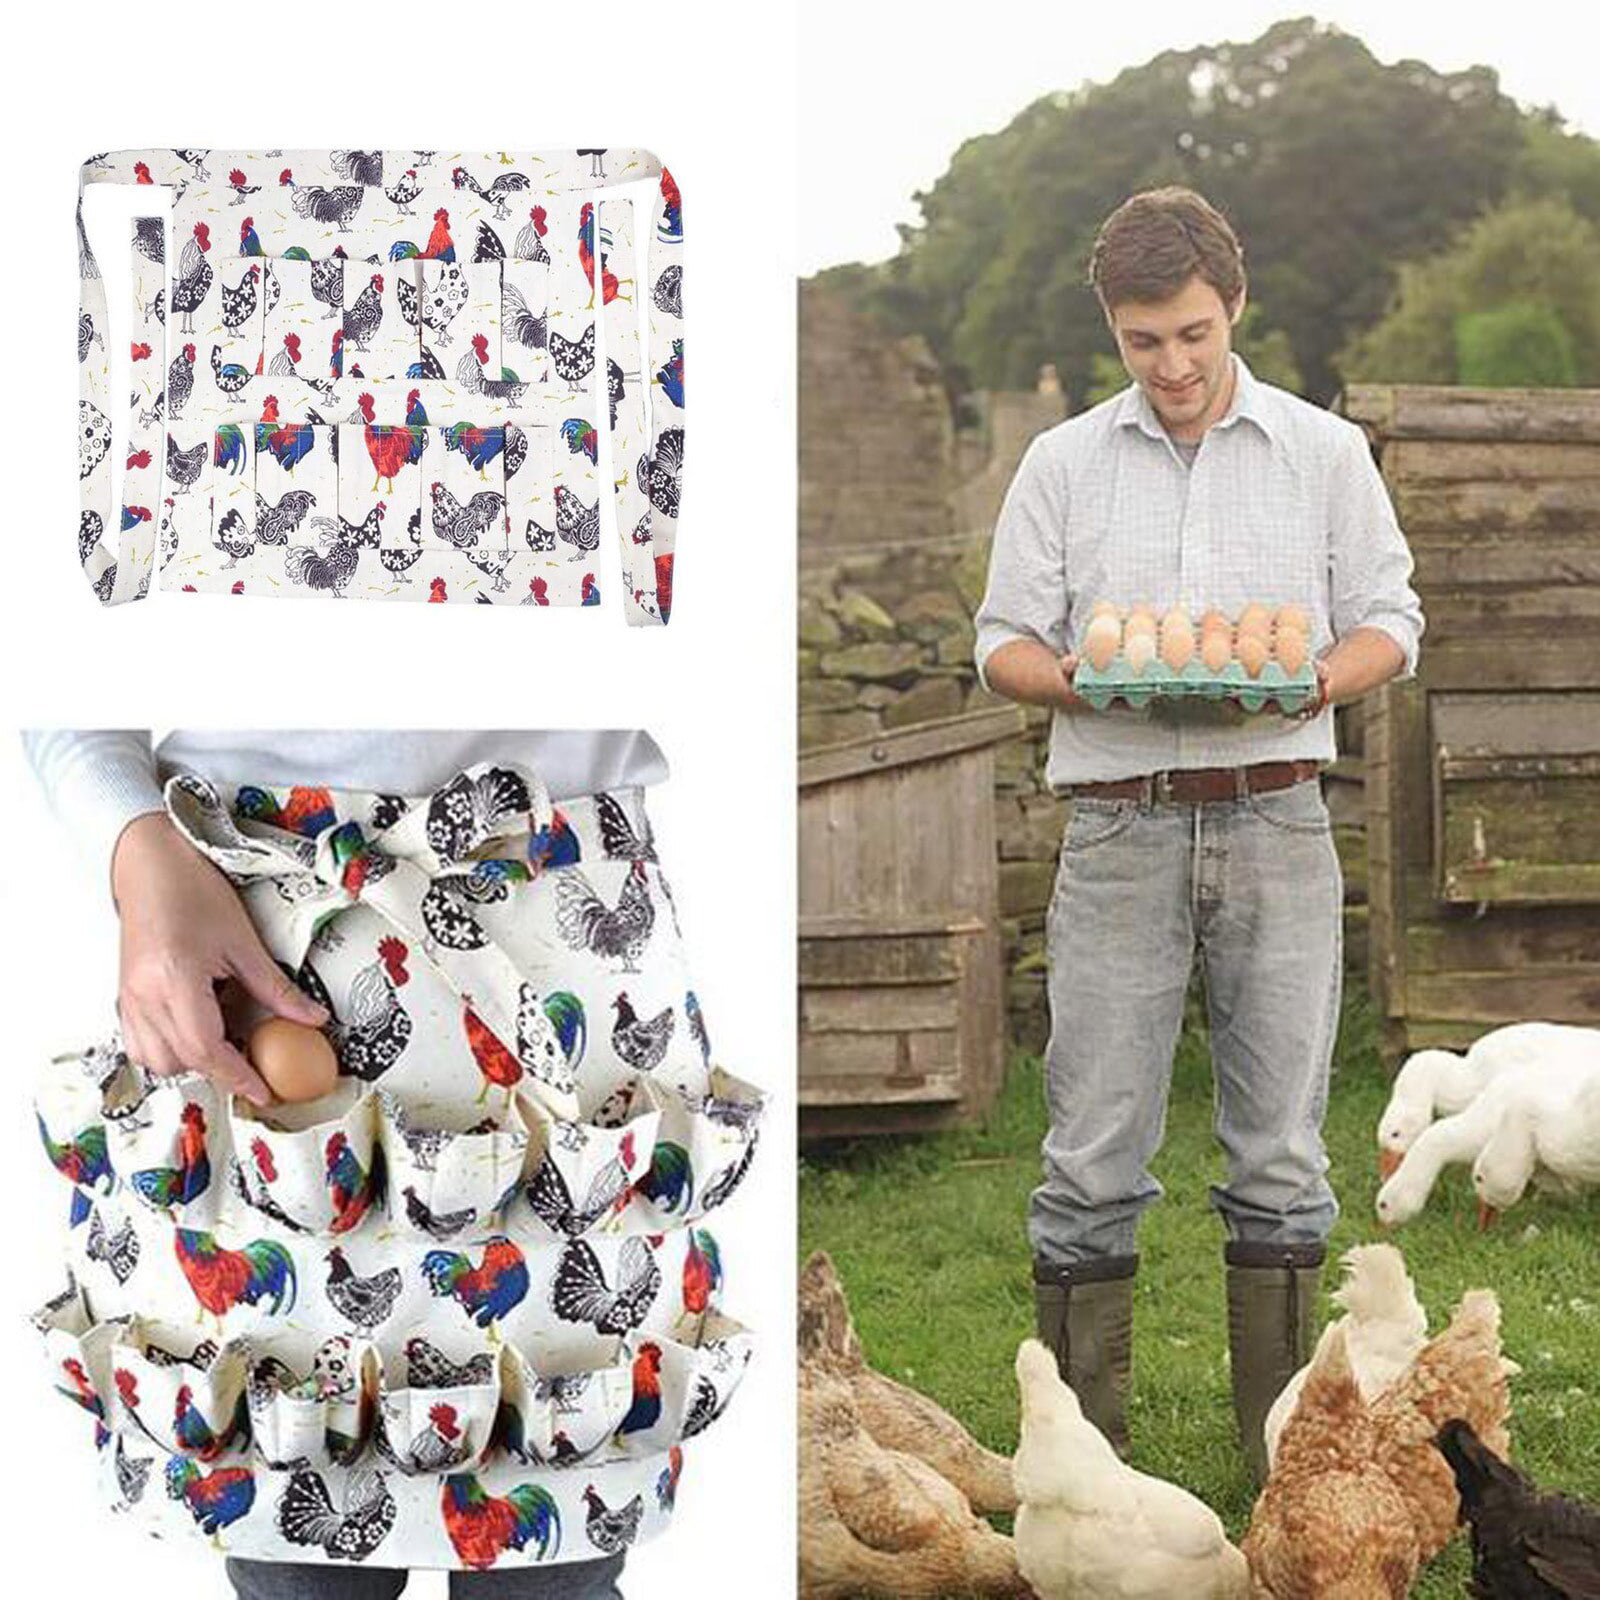 Egg Apron with 12 Pockets for Gathering Eggs - Bed Bath & Beyond